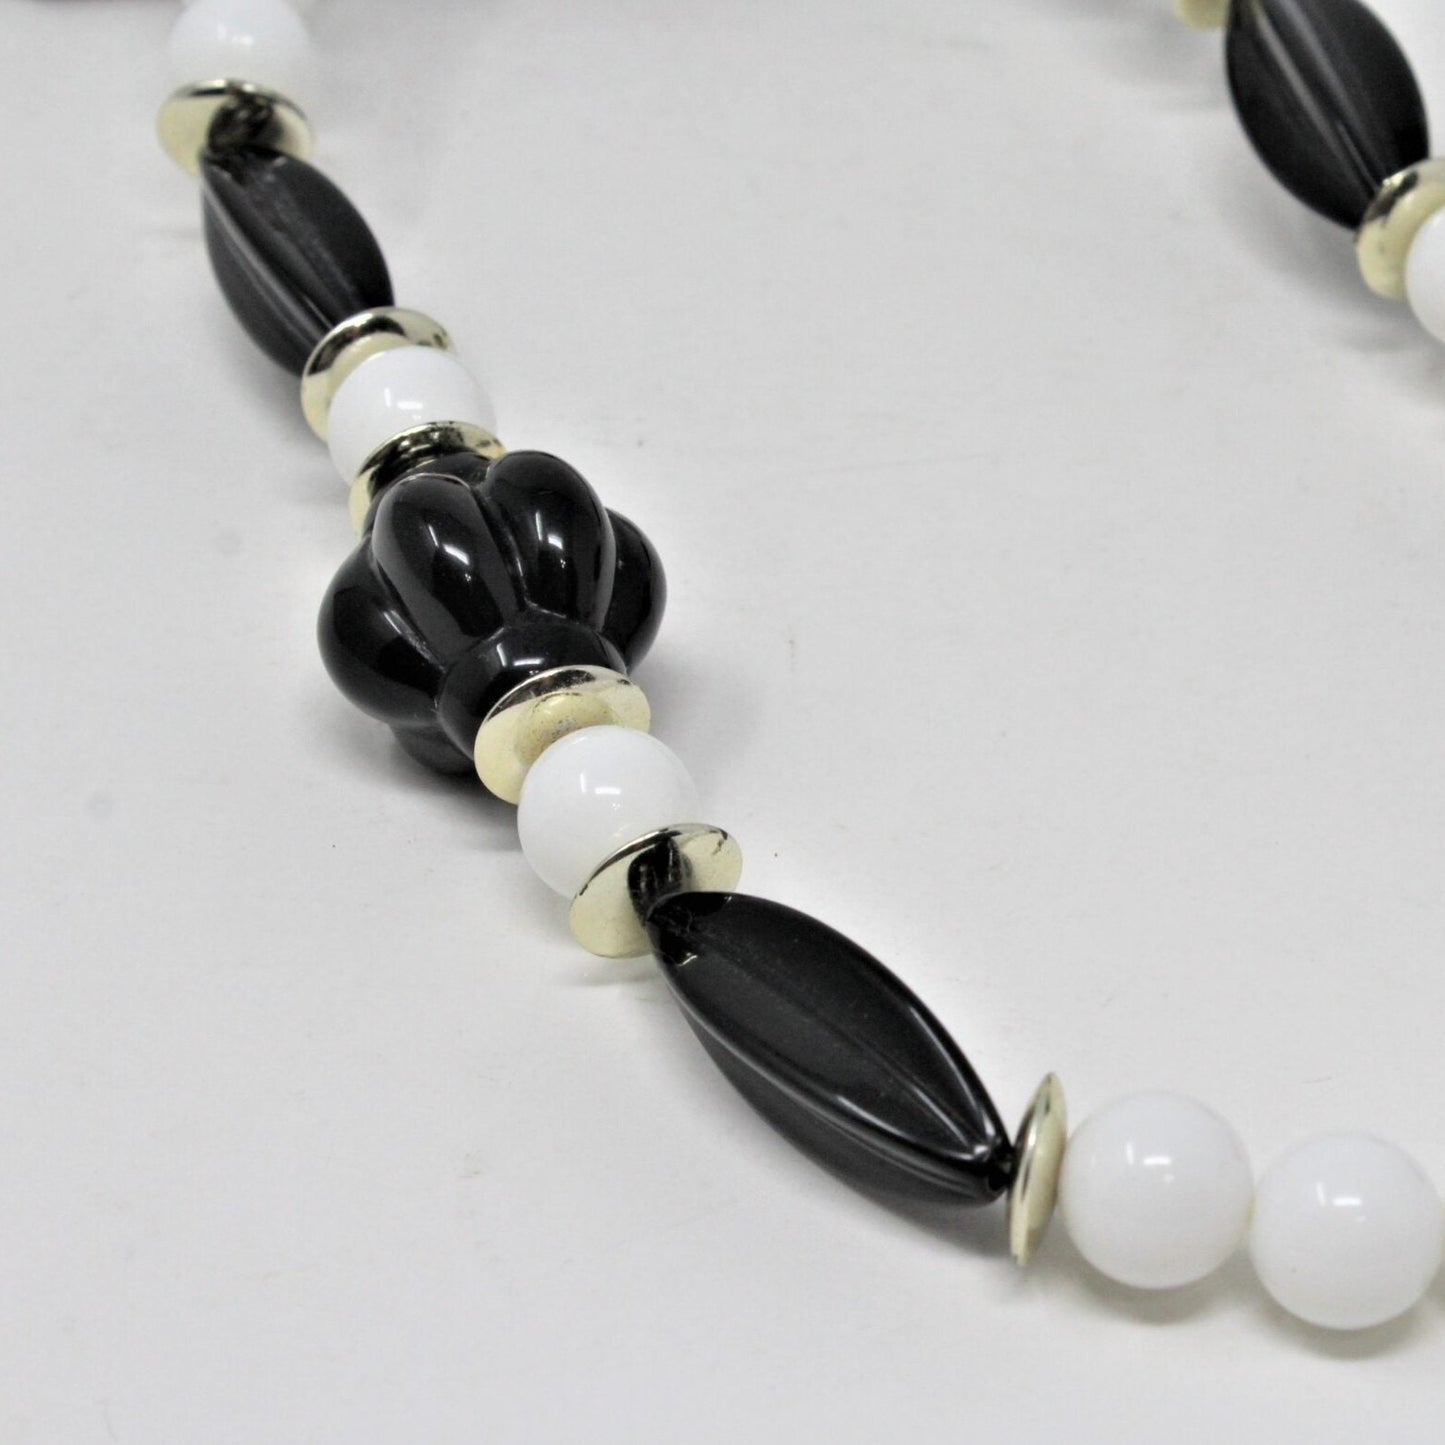 Necklace, Black and White Beads, Retro, Vintage